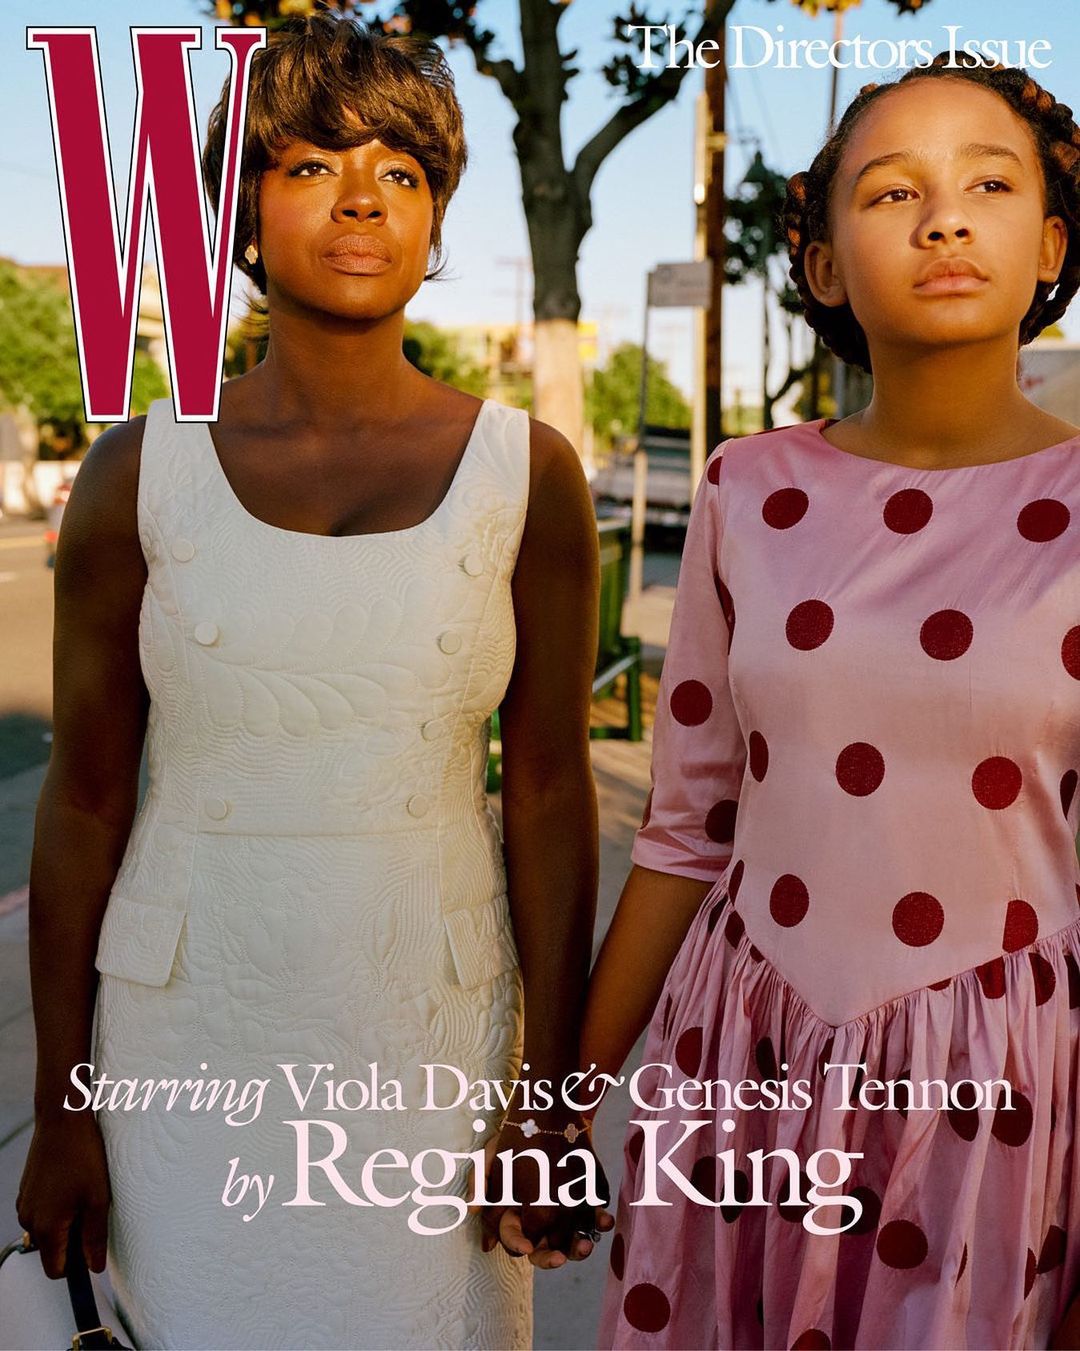 Viola Davis & Her Beautiful Family Dazzle on the Cover of W Magazine’s Directors Issue